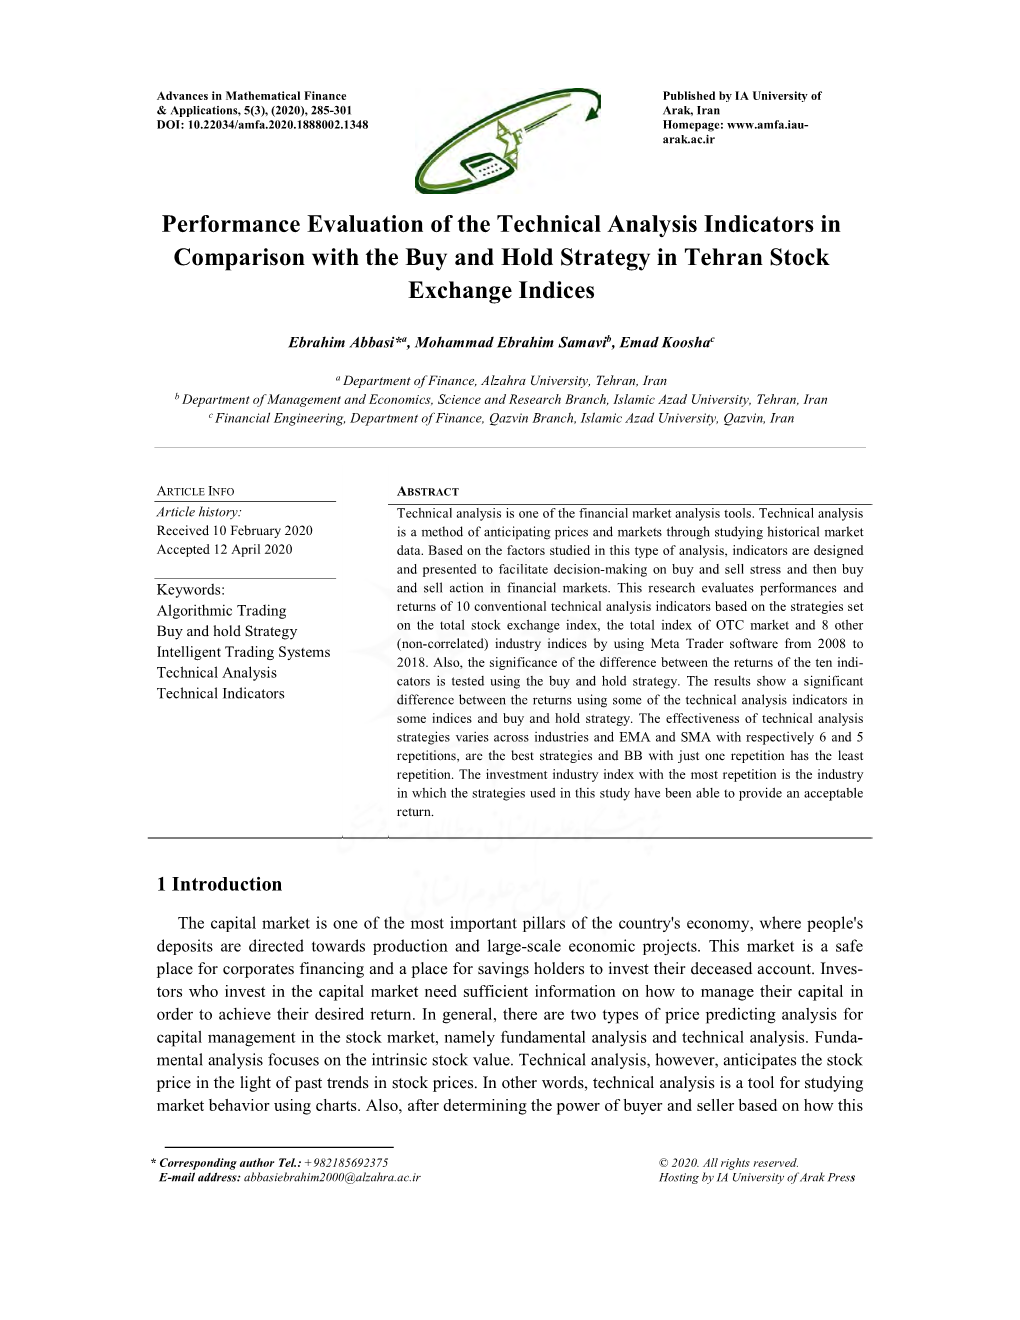 Performance Evaluation of the Technical Analysis Indicators in Comparison with the Buy and Hold Strategy in Tehran Stock Exchange Indices